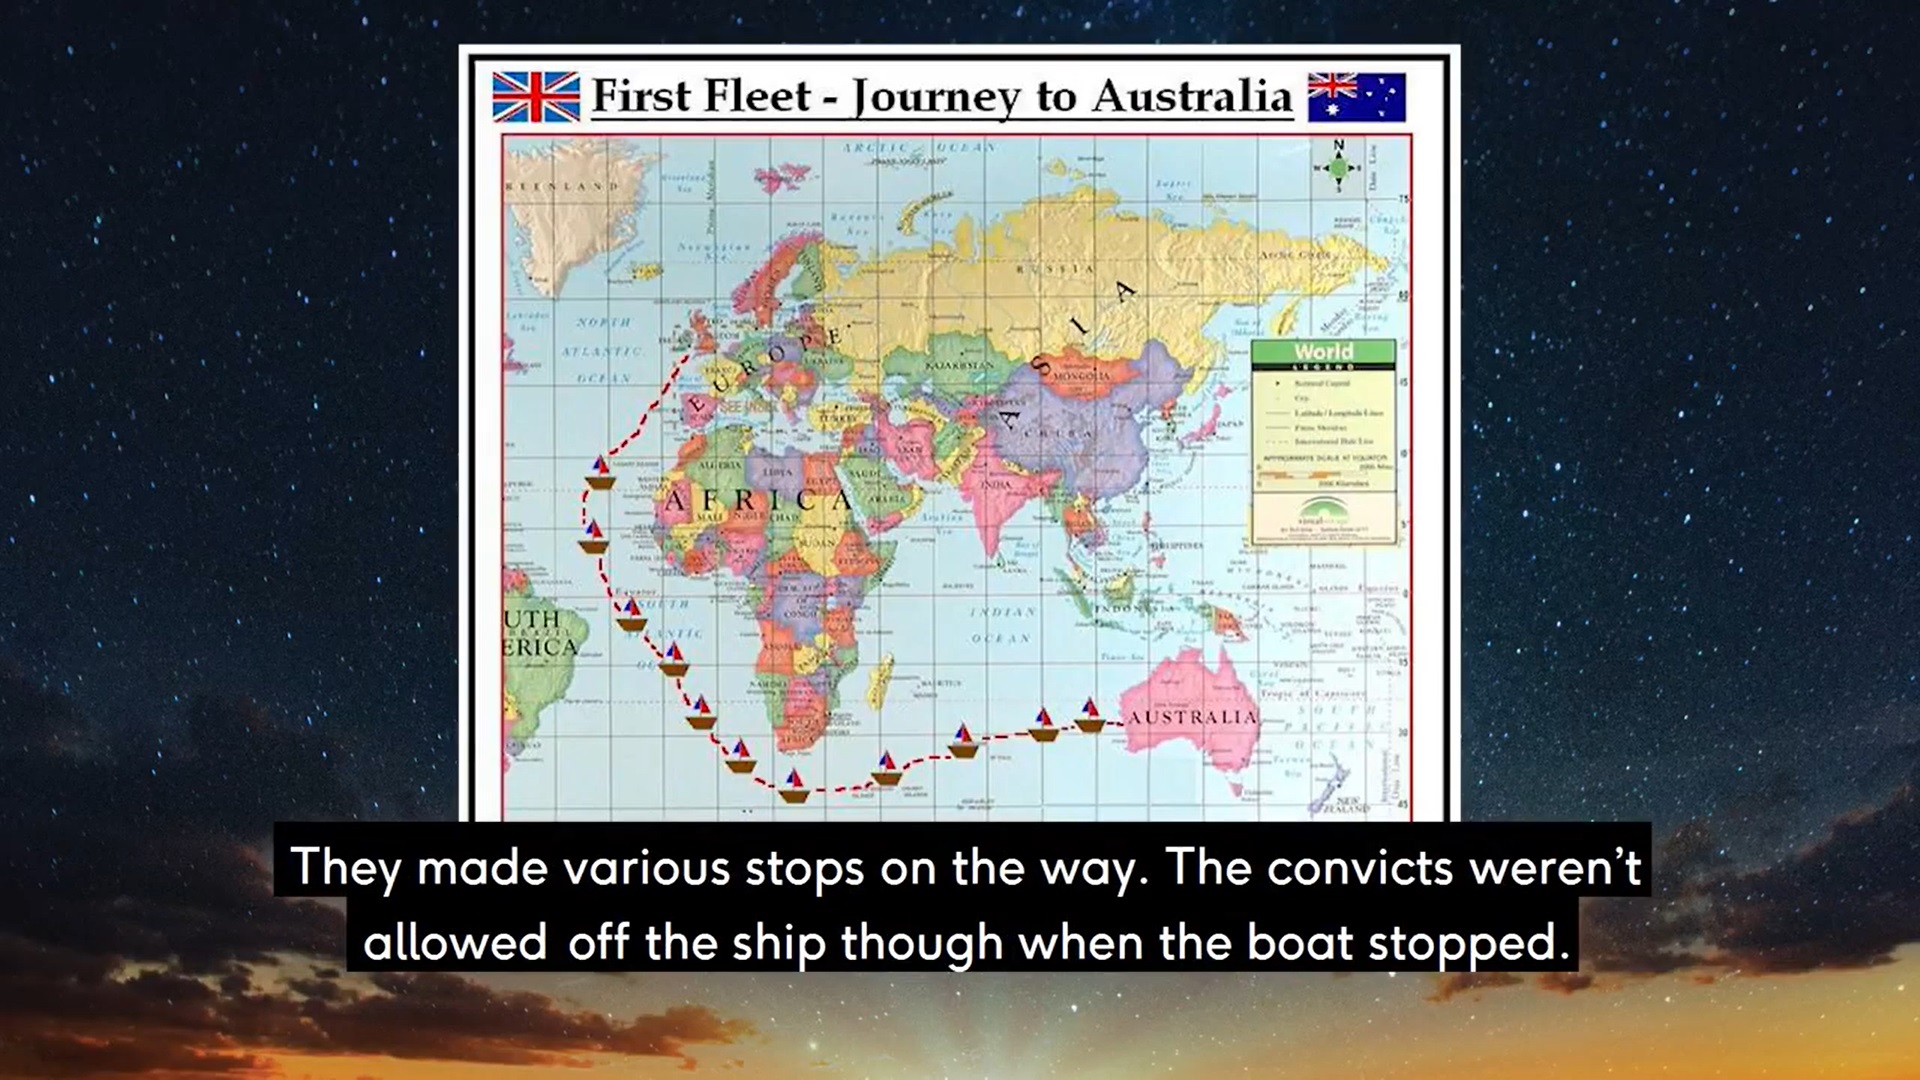 Our Country's Good - The first fleet's journey